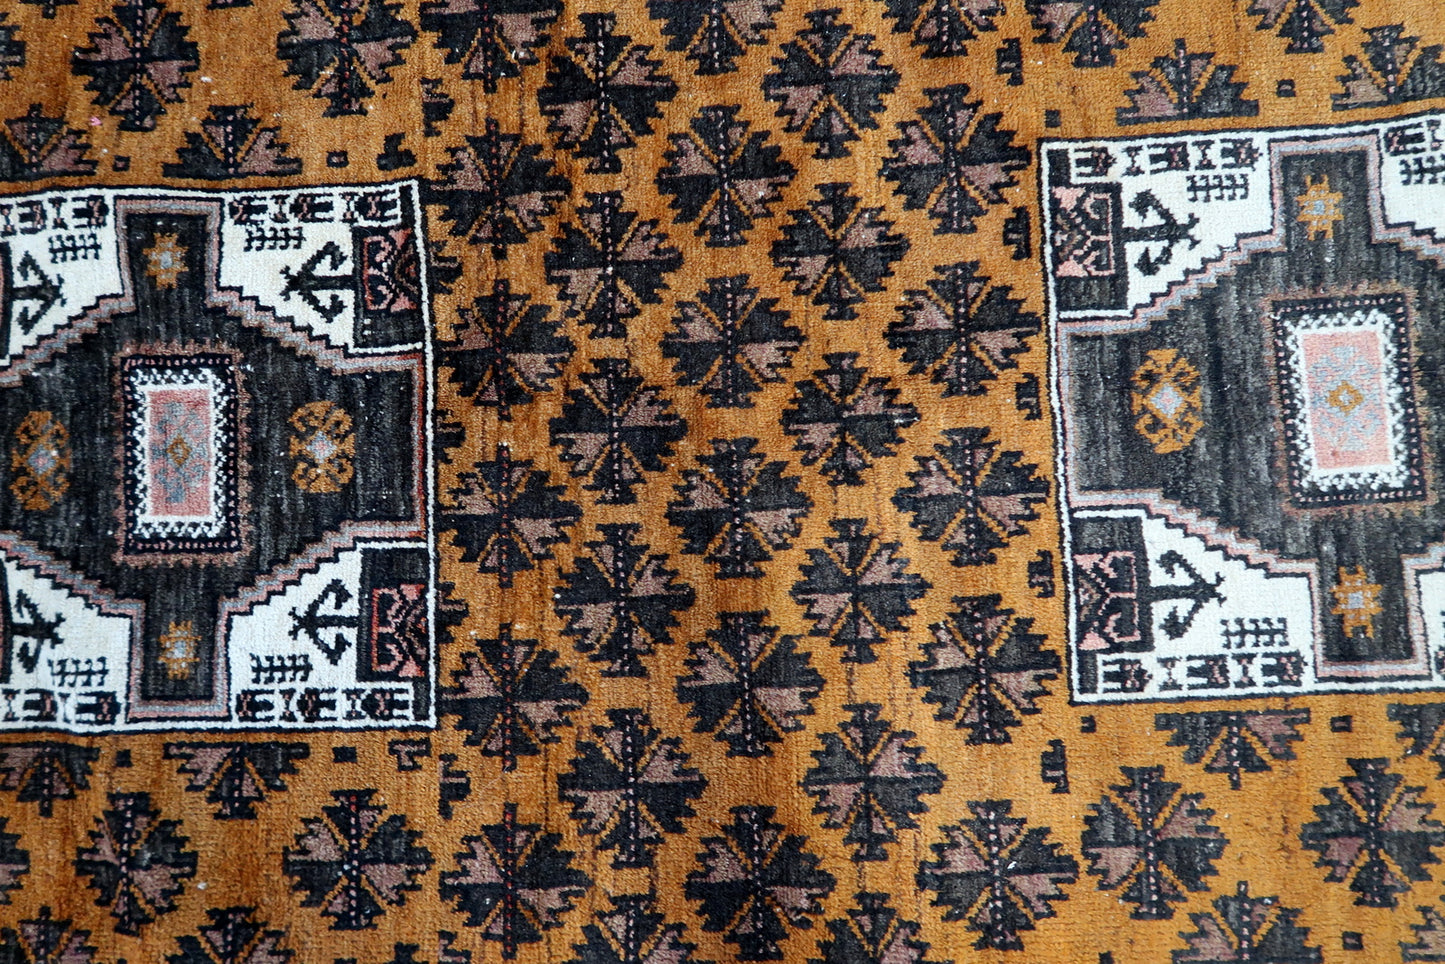 Detailed view of the complex patterns in the border, enhancing the rug's overall aesthetic